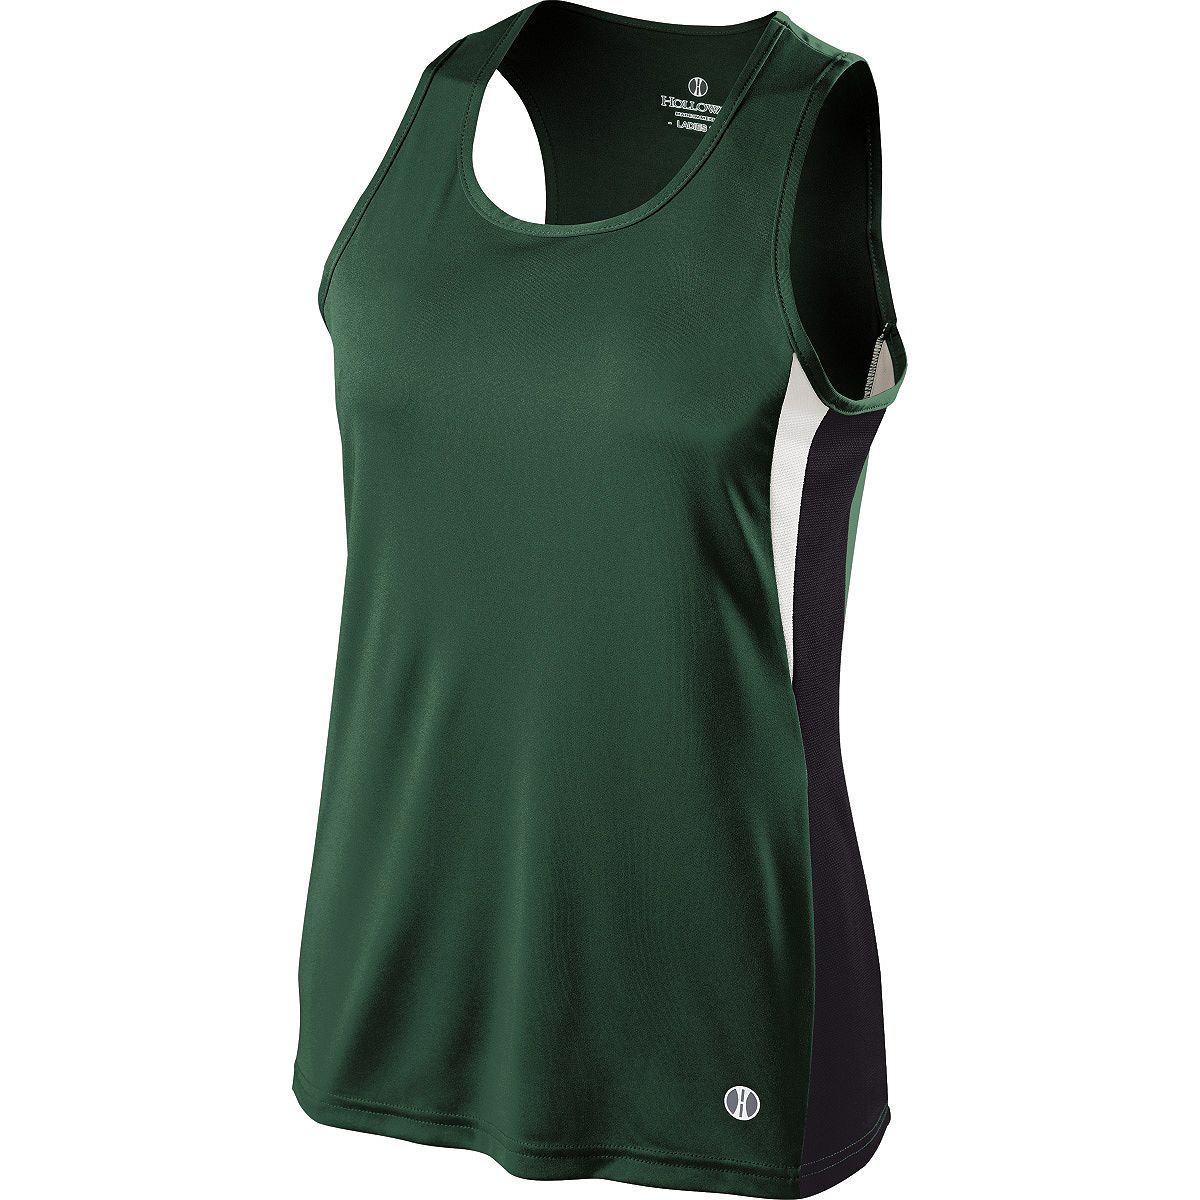 Holloway Ladies Vertical Singlet in Forest/Black/White  -Part of the Ladies, Track-Field, Holloway, Shirts product lines at KanaleyCreations.com